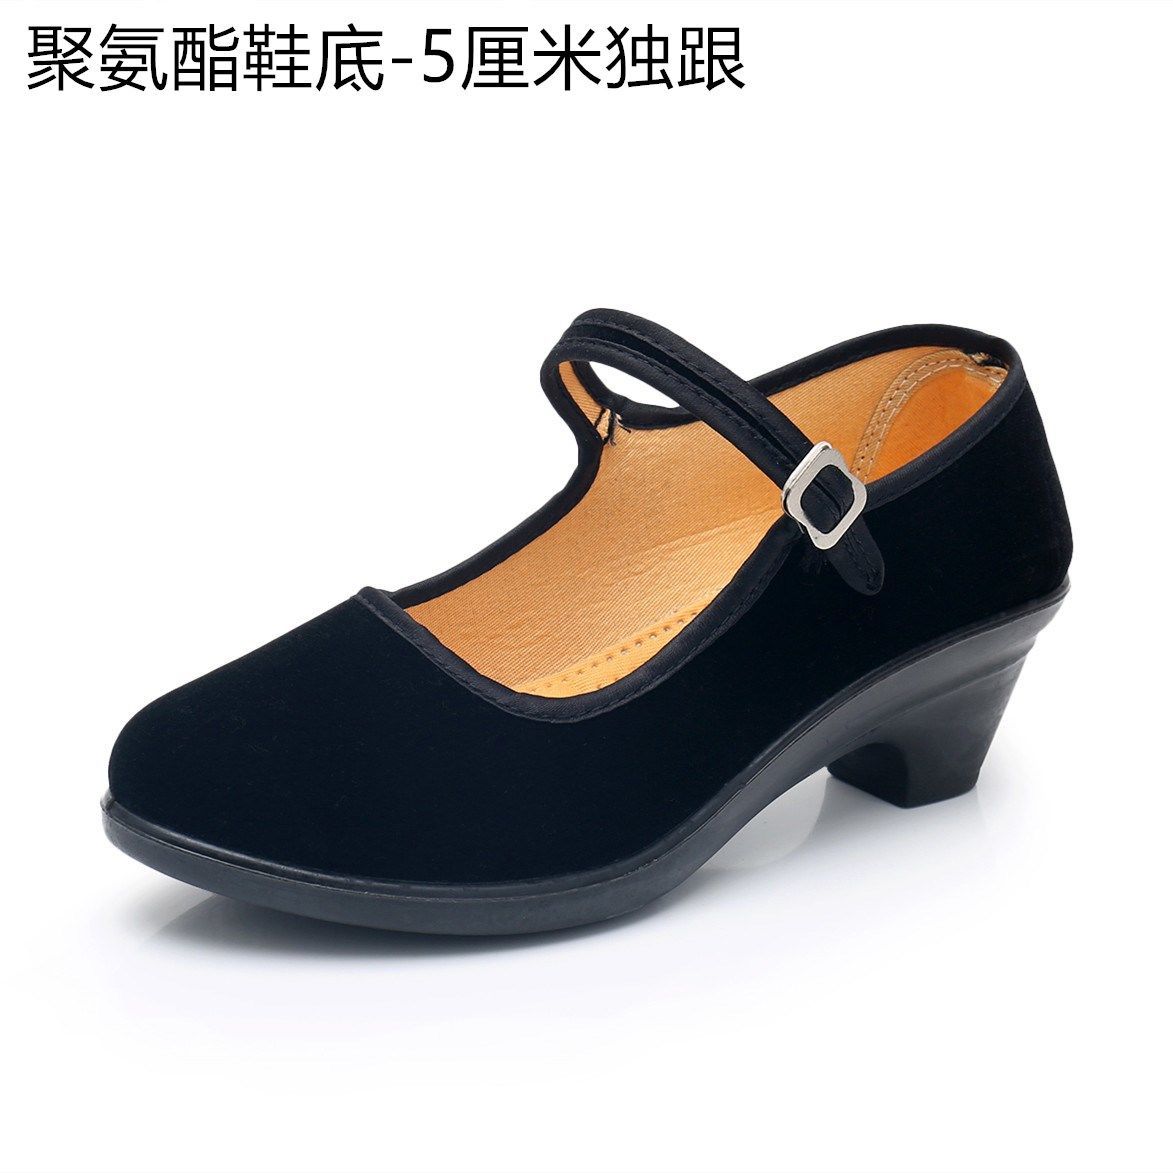 Old Beijing cloth shoes women's hotel work shoes black cloth shoes soft bottom non-slip flat bottom thick bottom mother shoes dance shoes